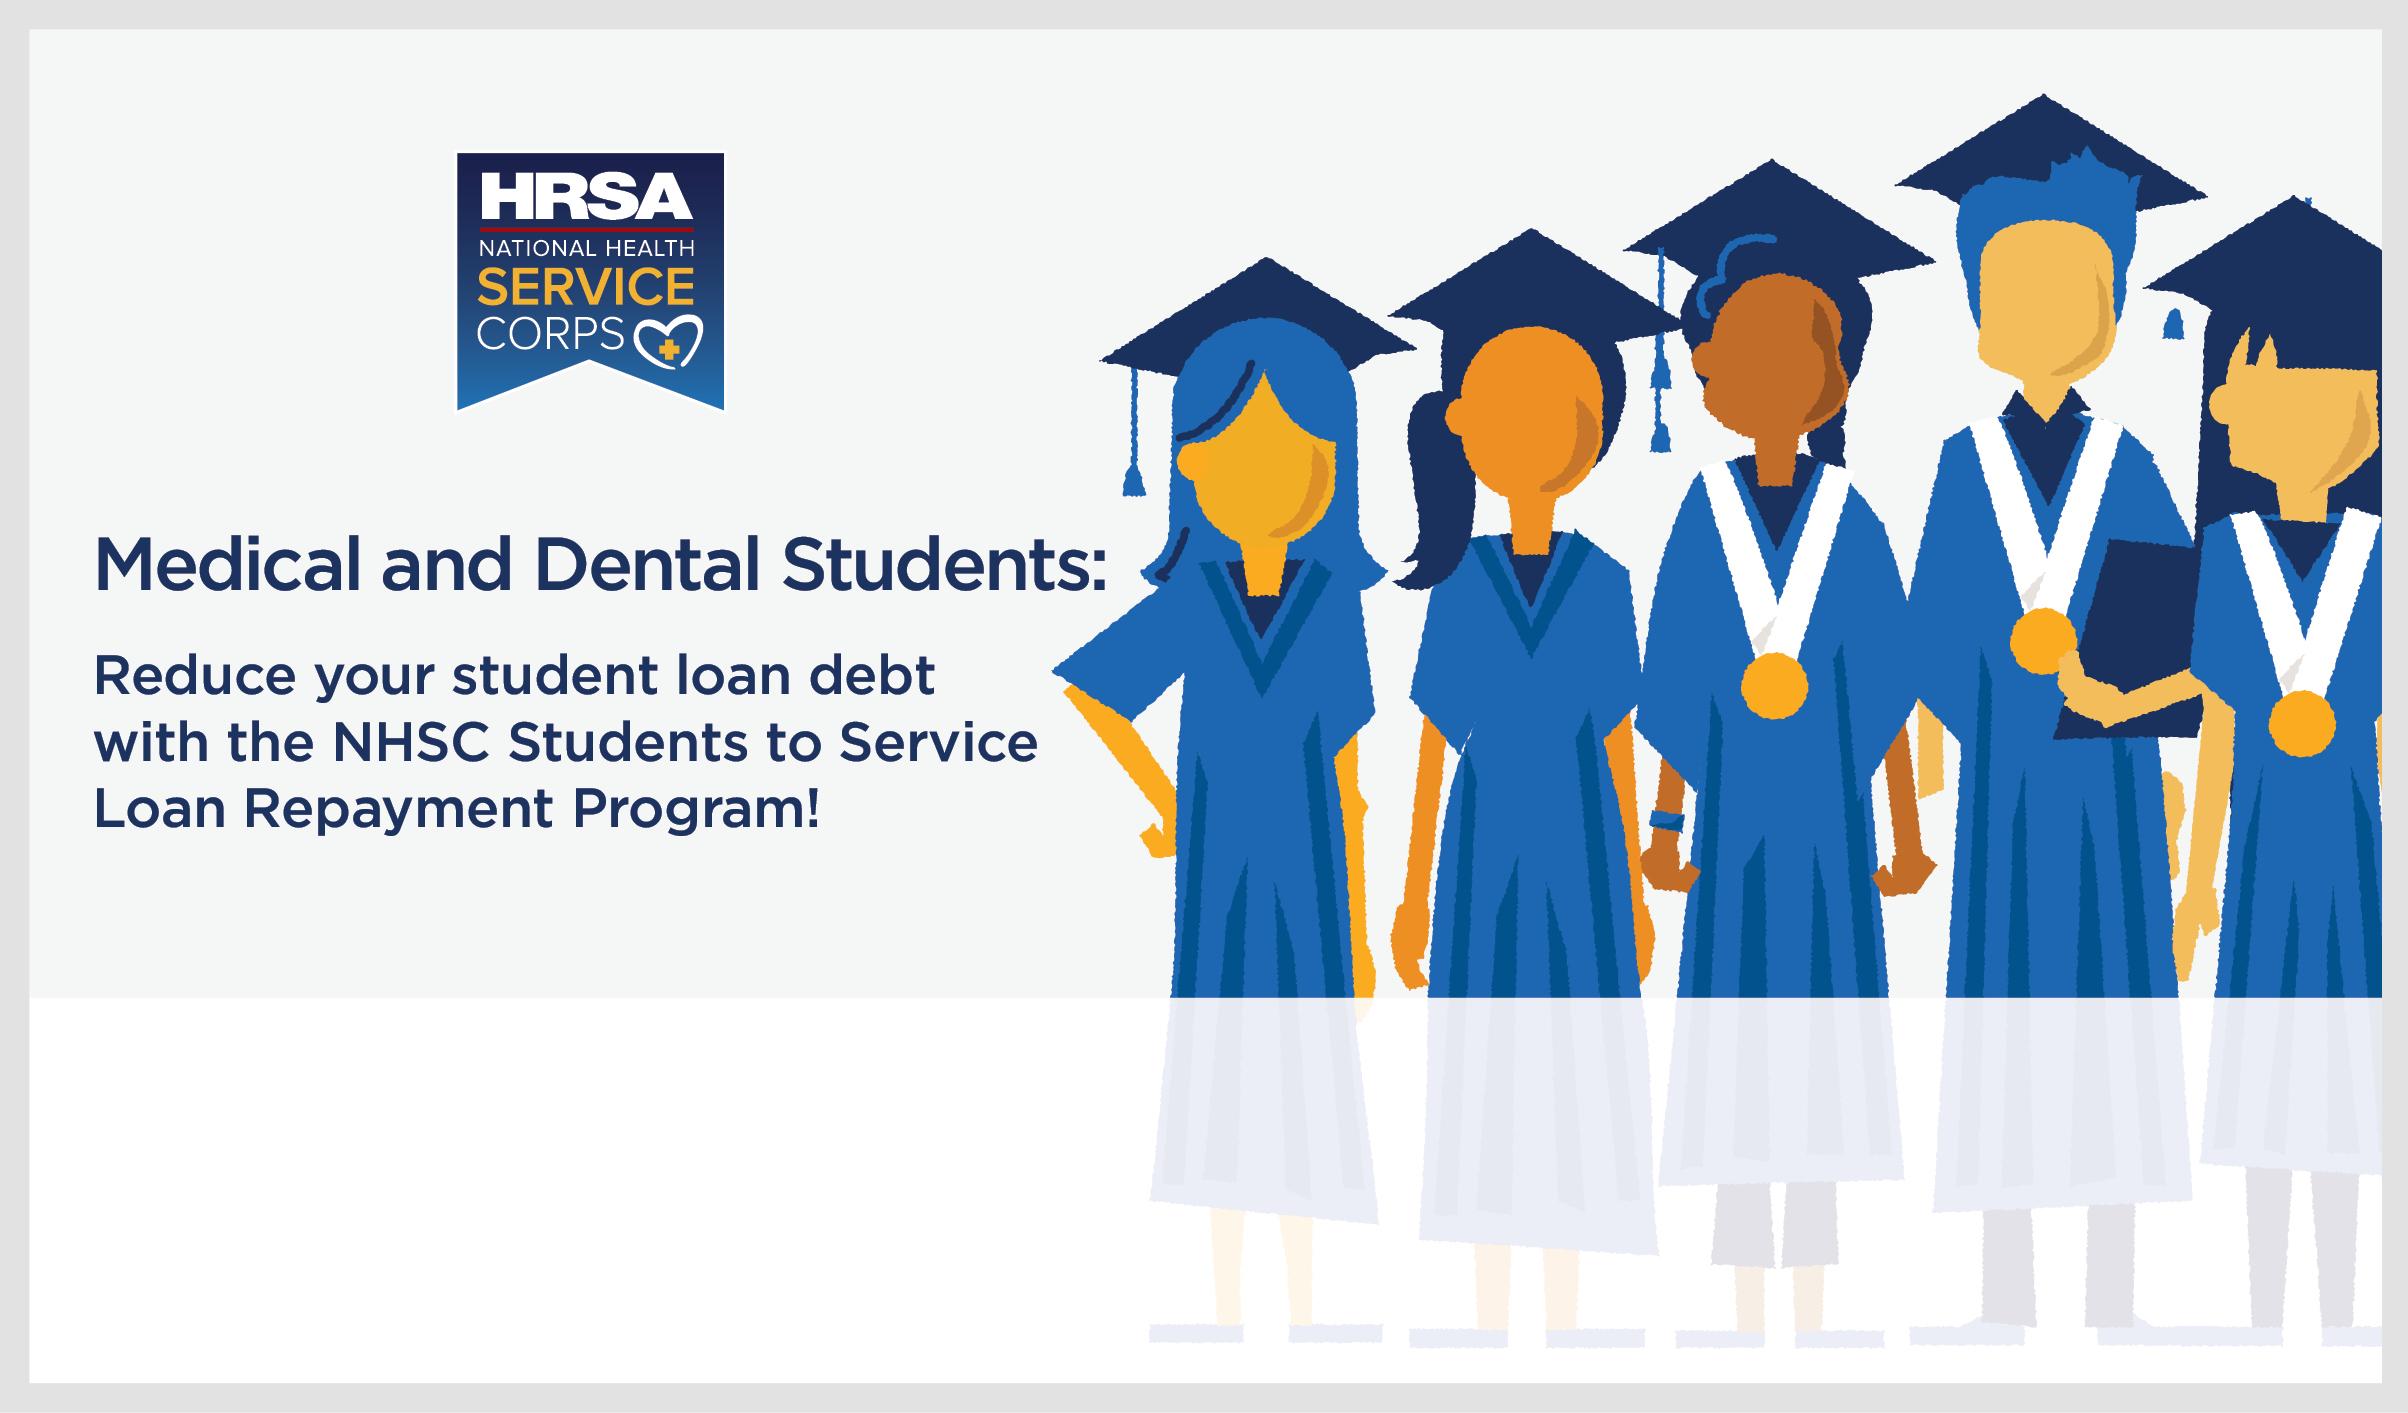 Reduce your student loan debt with the NHSC Students to Service Loan Repayment Program